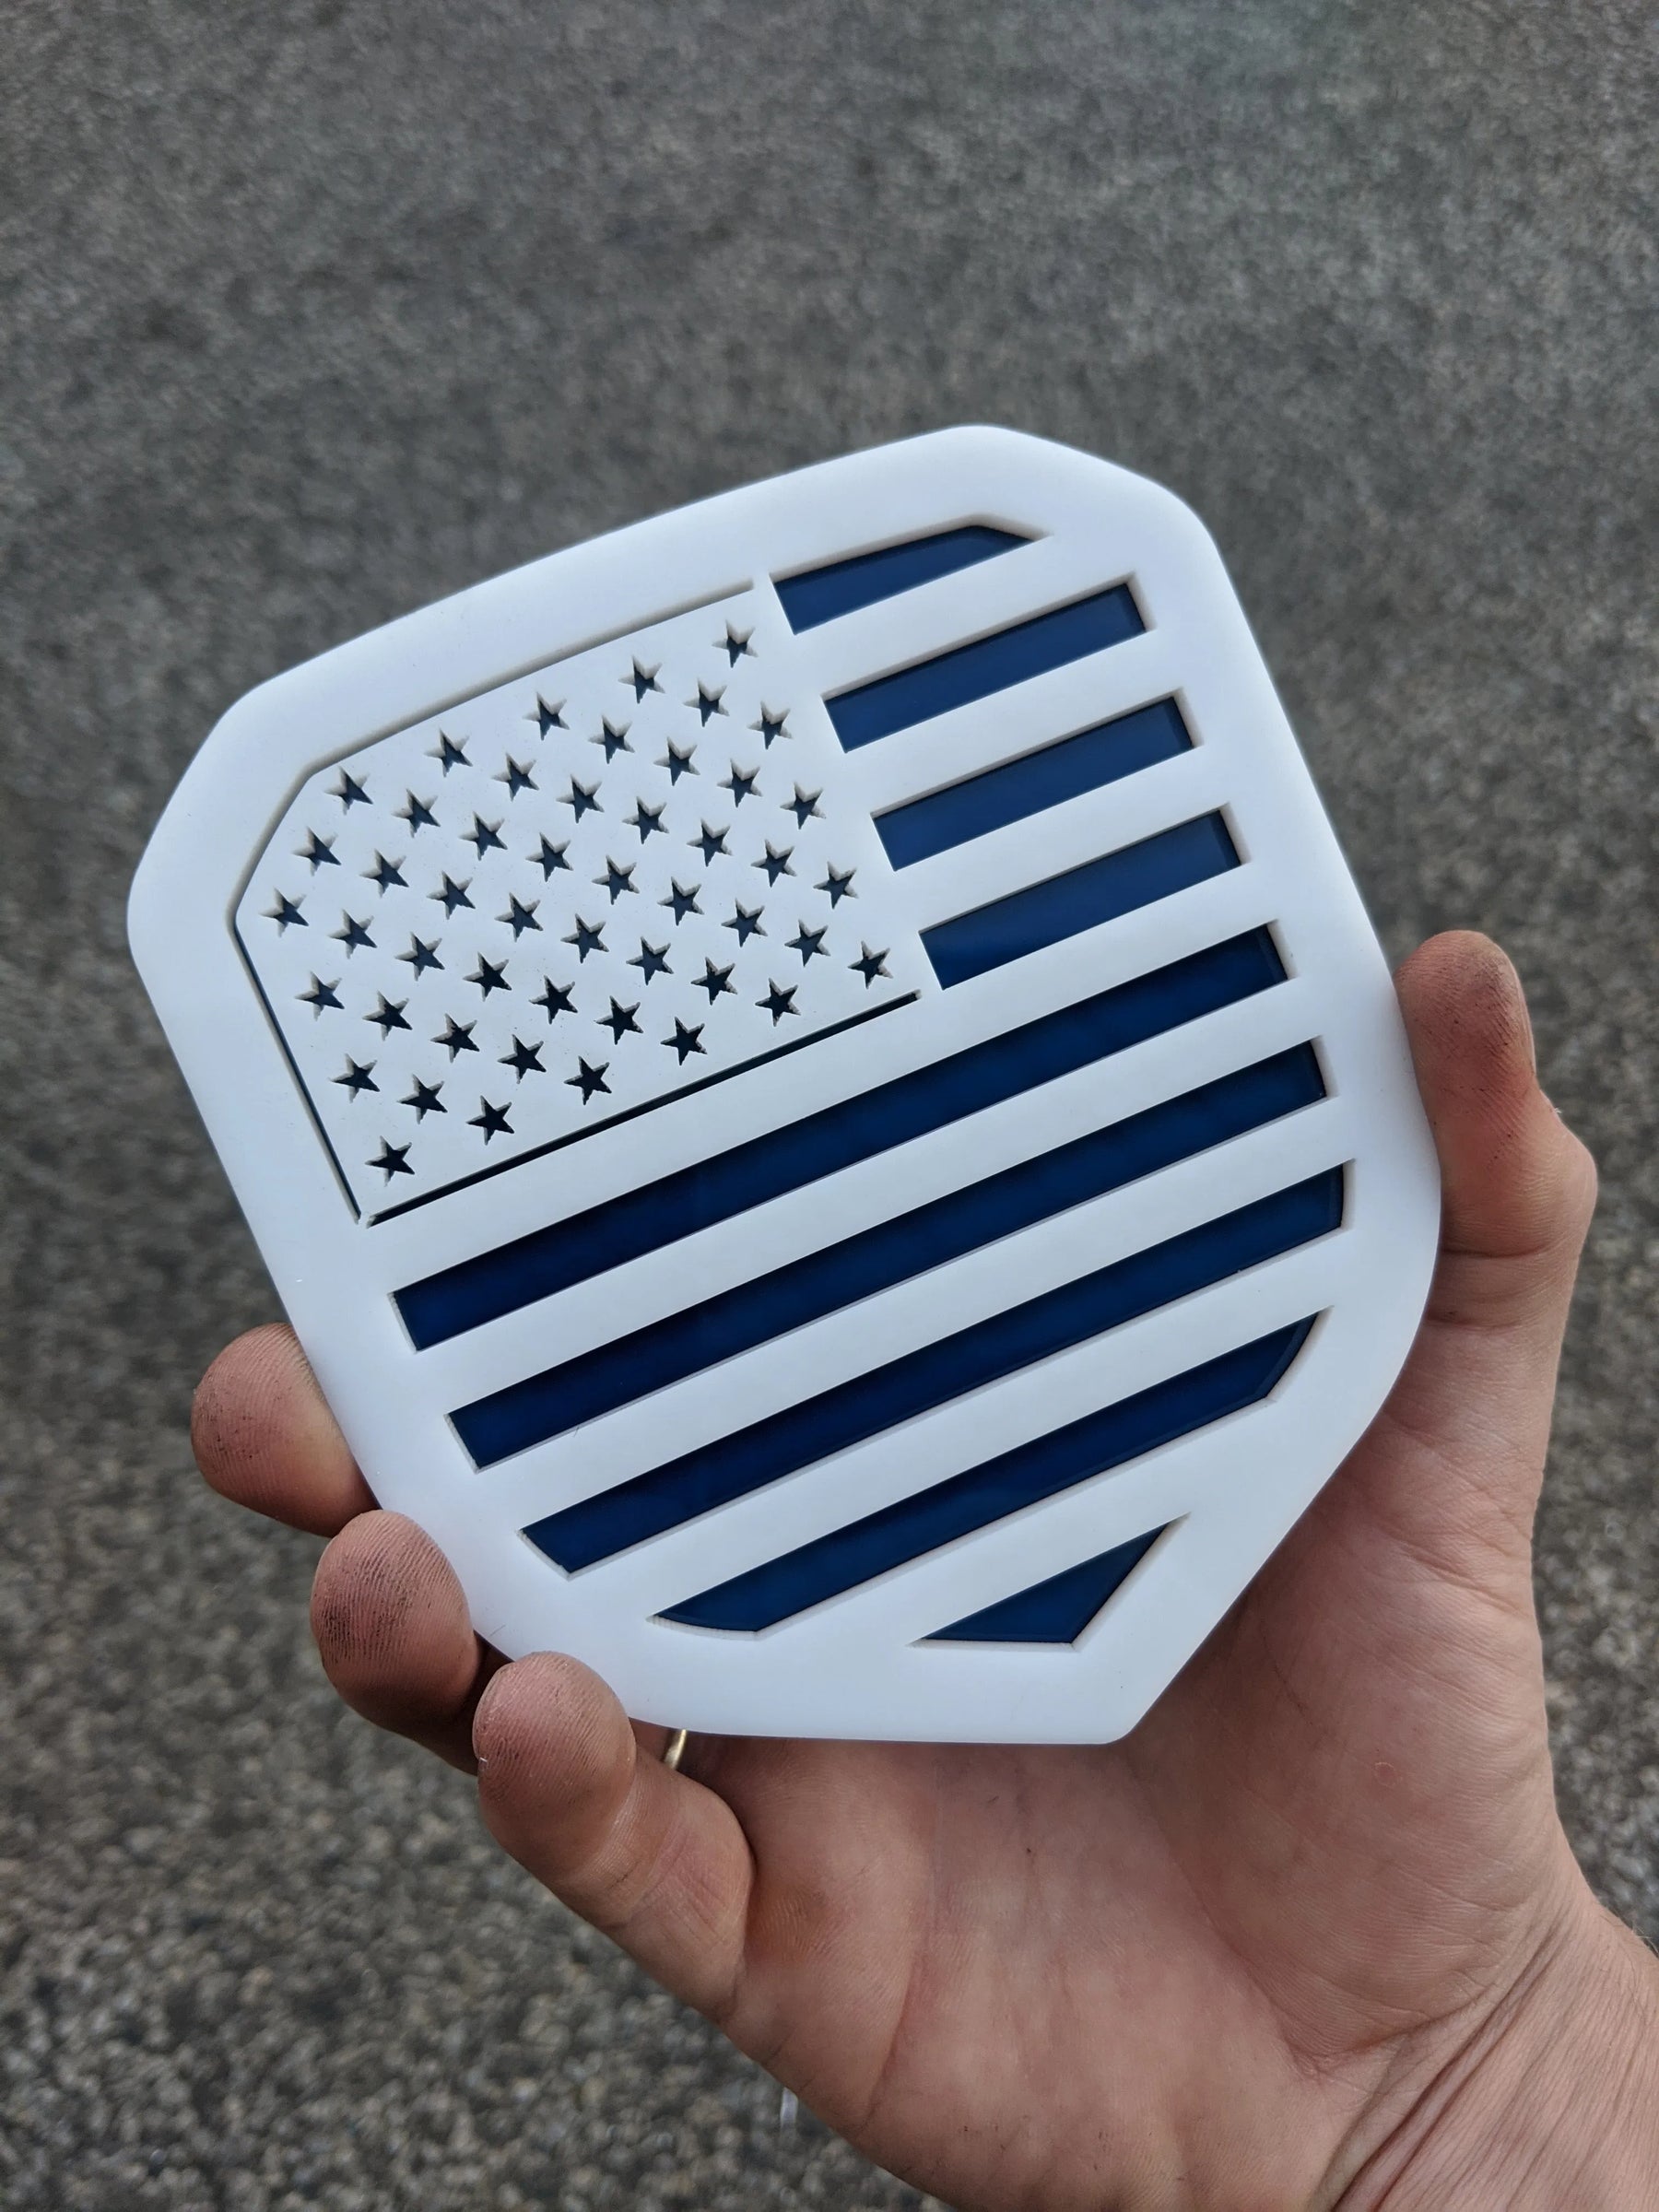 American Flag Badge - Fits 2013-2018 Dodge® Ram® Grille - 1500, 2500, 3500 - White on Blue